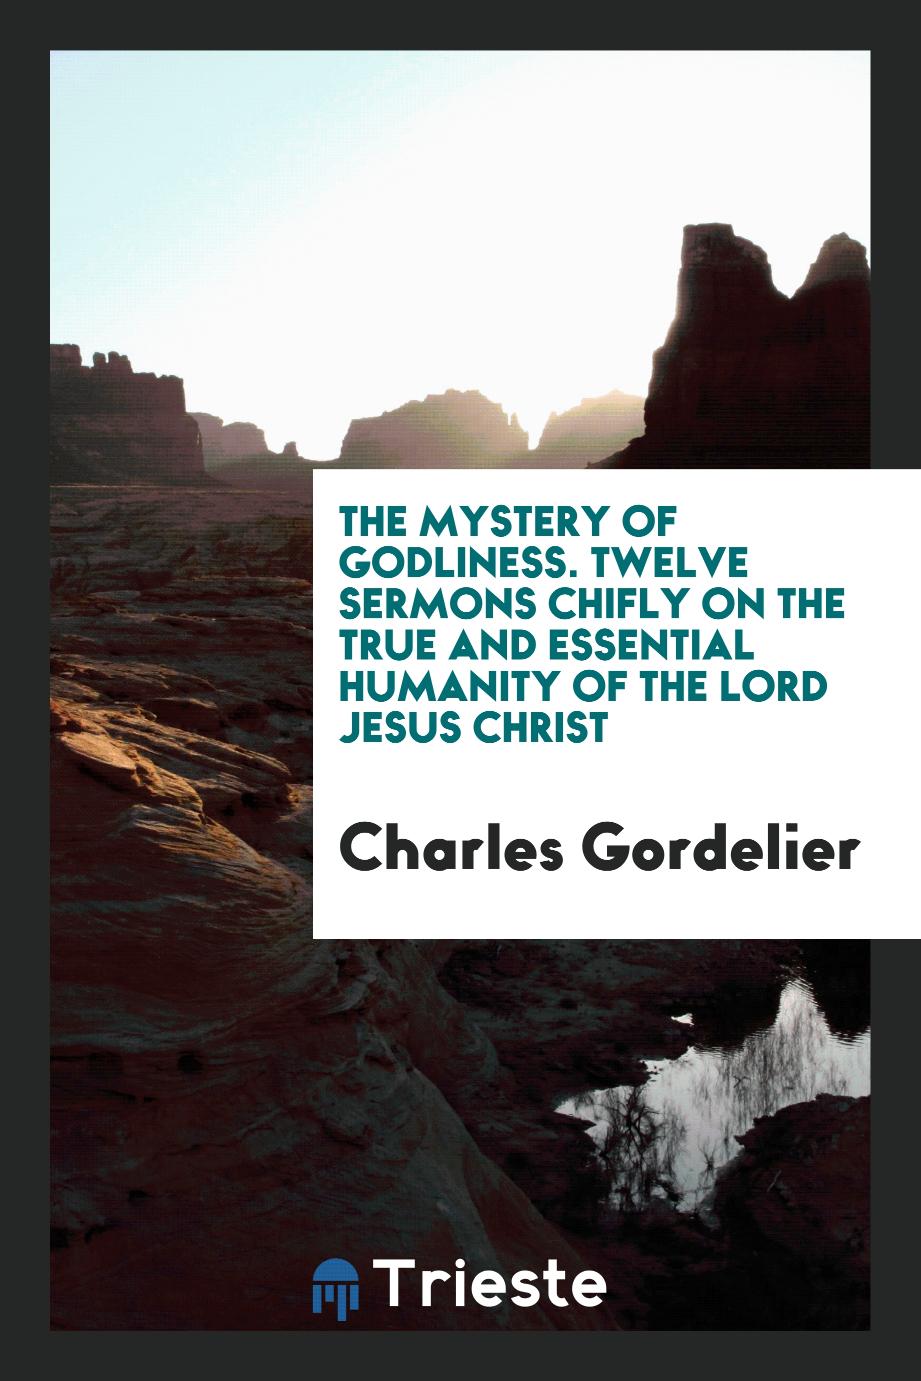 The Mystery of Godliness. Twelve Sermons Chifly on the True and Essential Humanity of the Lord Jesus Christ